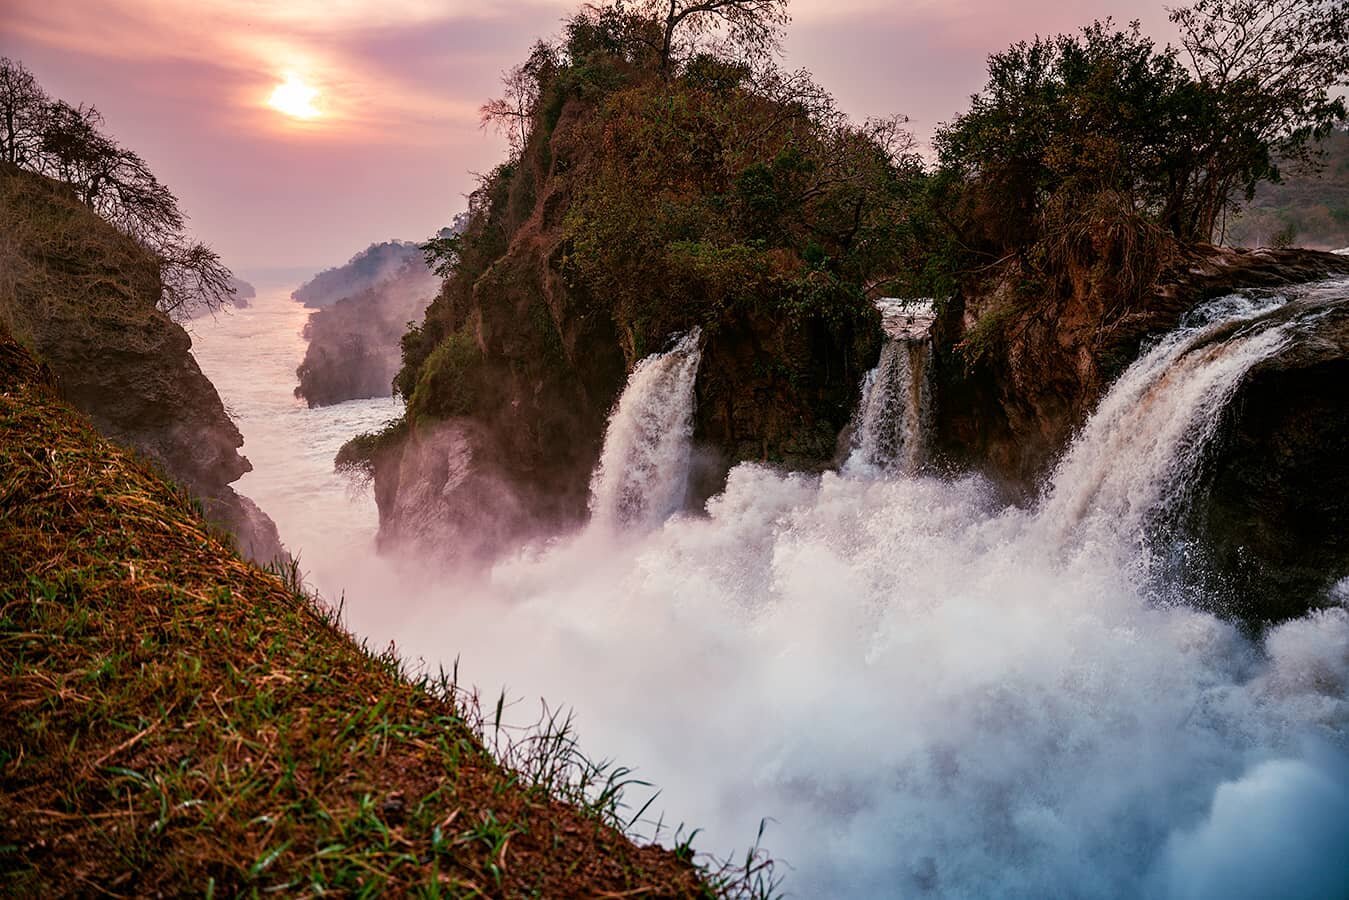 Anybody been to this beast of a waterfall? Murchison Falls in Uganda is one of the craziest, most impressive, bowel-loosening waterfalls I've ever seen. The White Nile was in flood, which meant the surging power of the river was even more chaotic as 